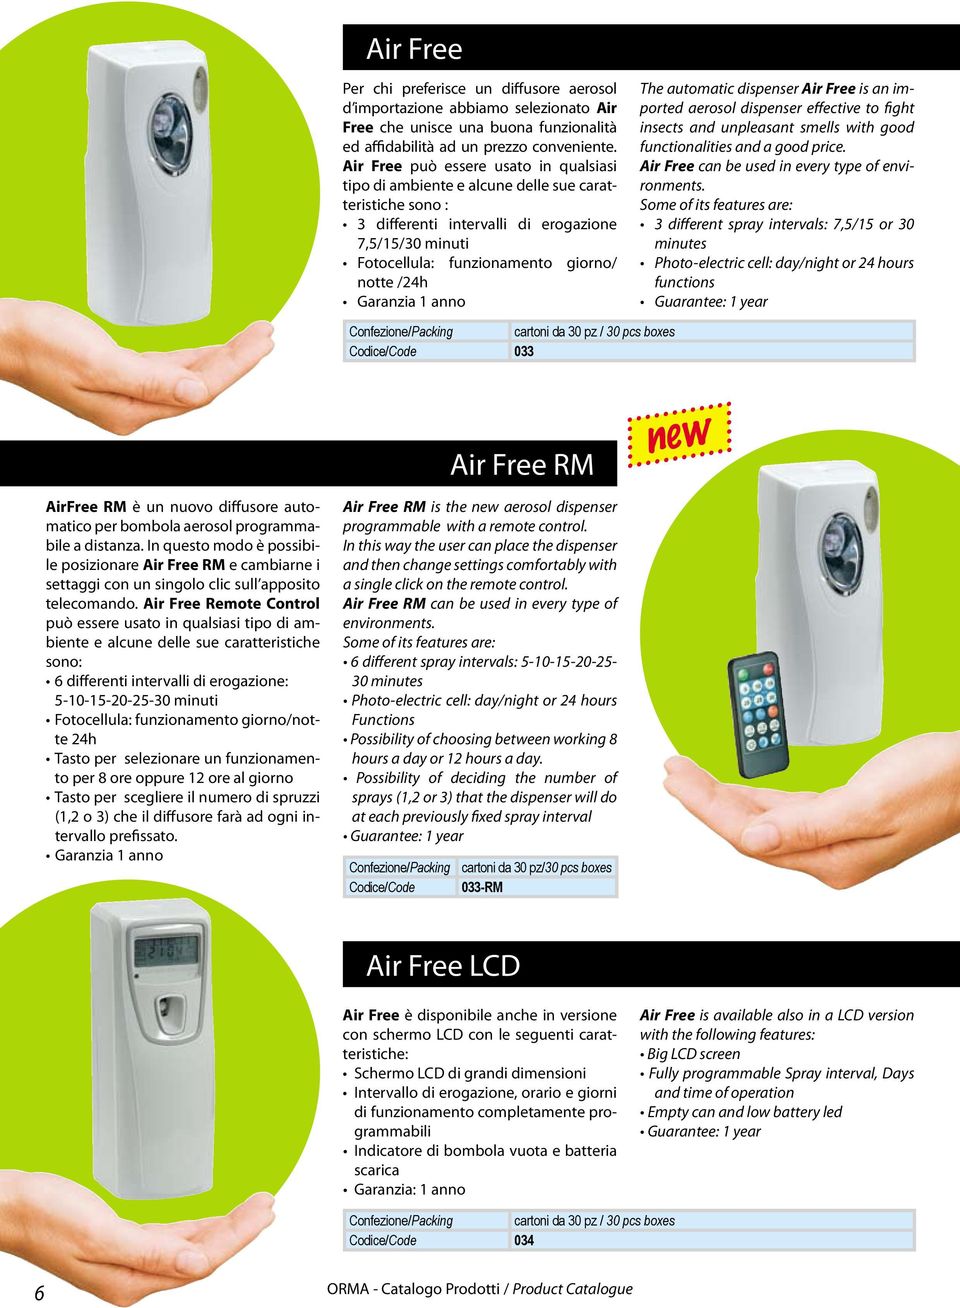 Garanzia 1 anno The automatic dispenser Air Free is an imported aerosol dispenser effective to fight insects and unpleasant smells with good functionalities and a good price.